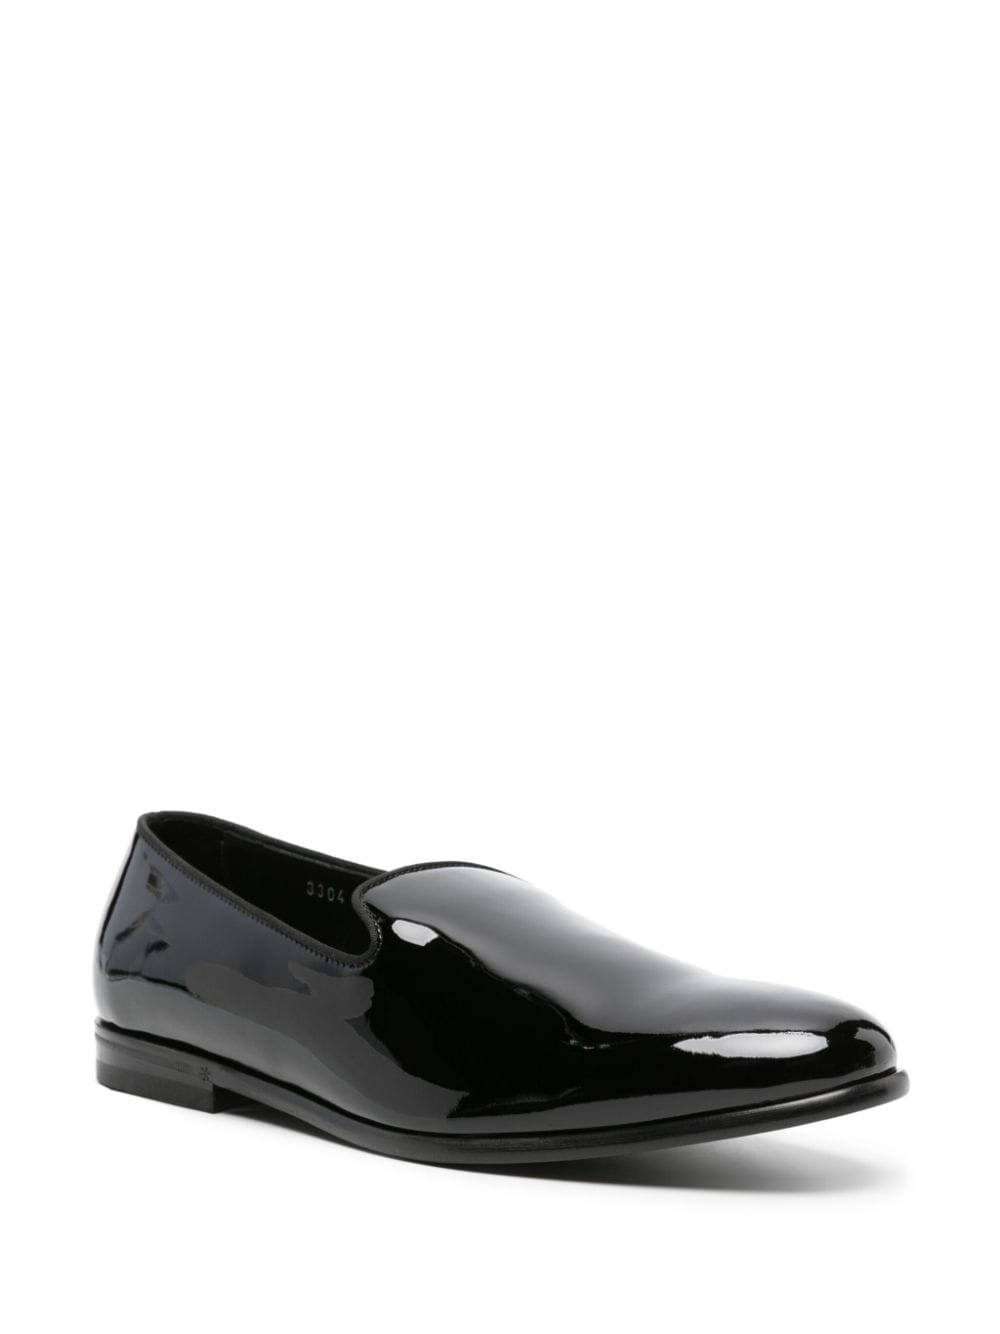 Black moccasin in shiny leather<br><br>